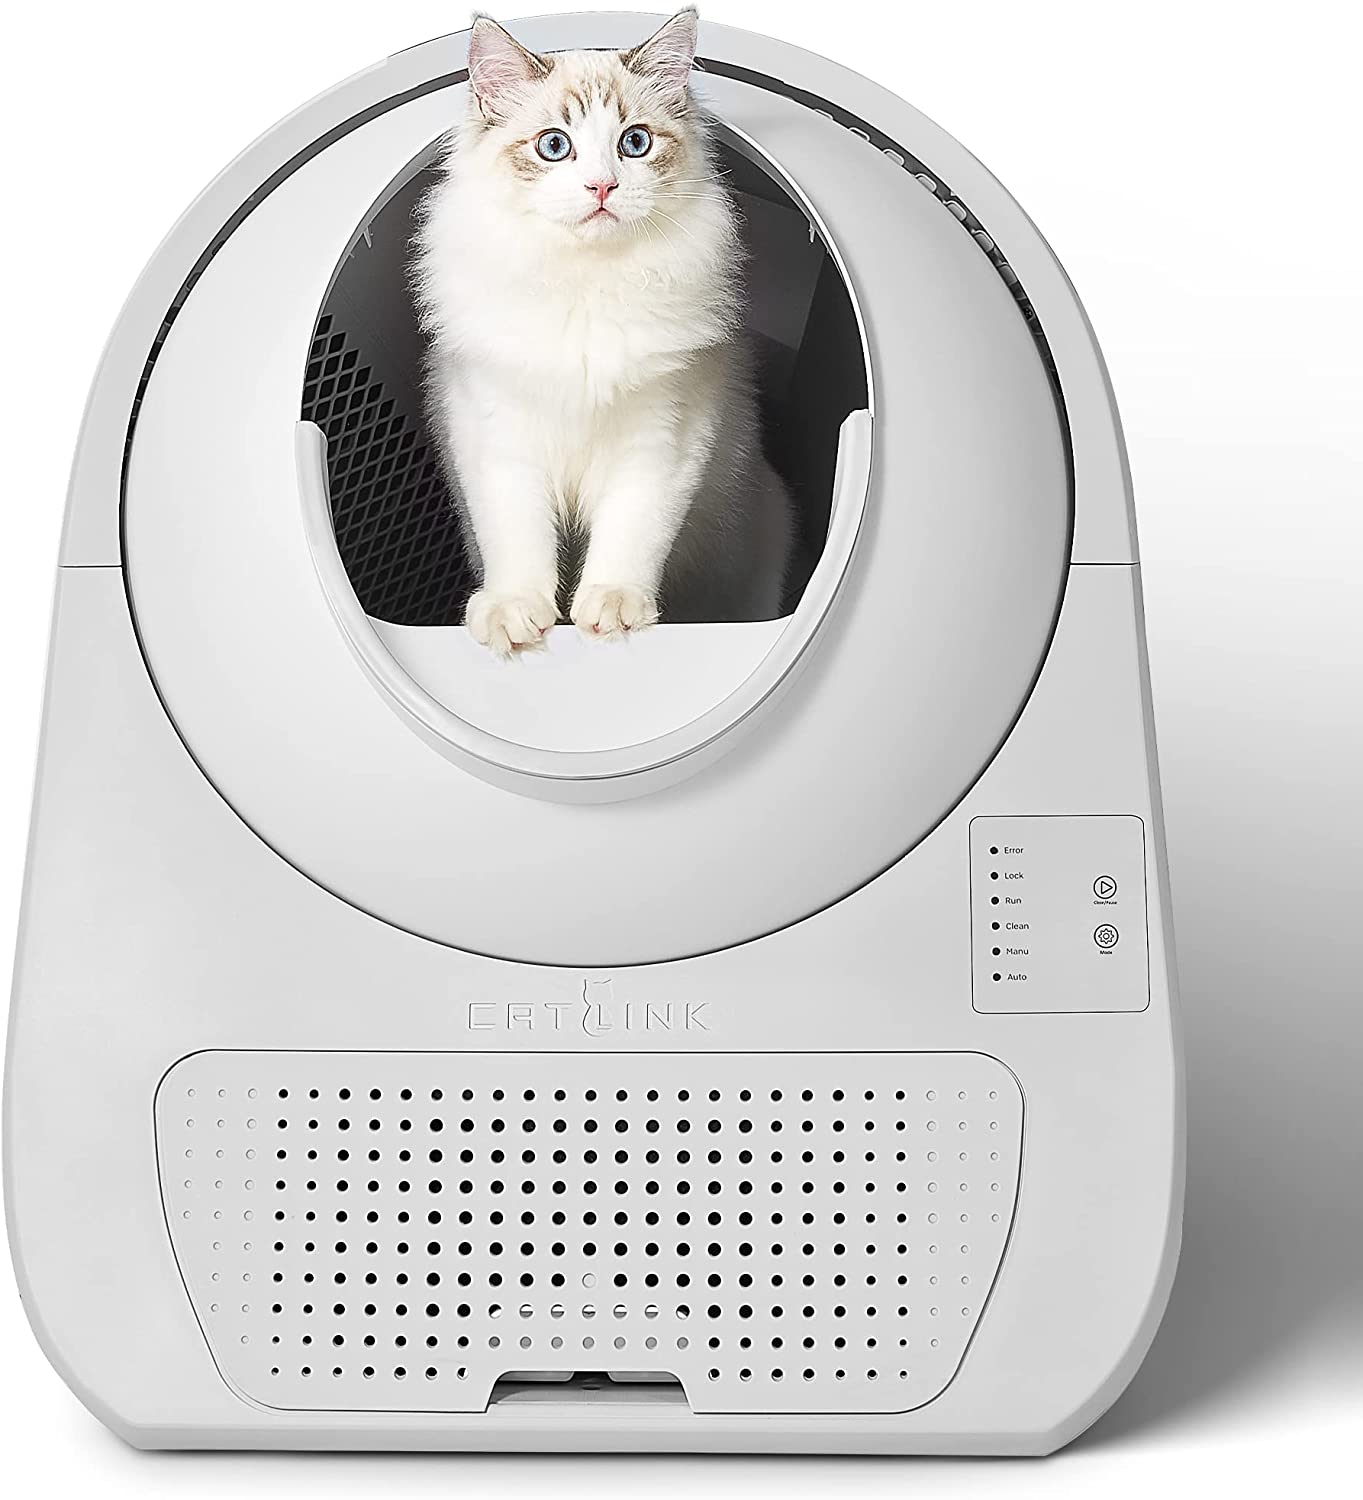 CATLINK Self Cleaning Cat Litter Box, Automatic Cat Litter Box